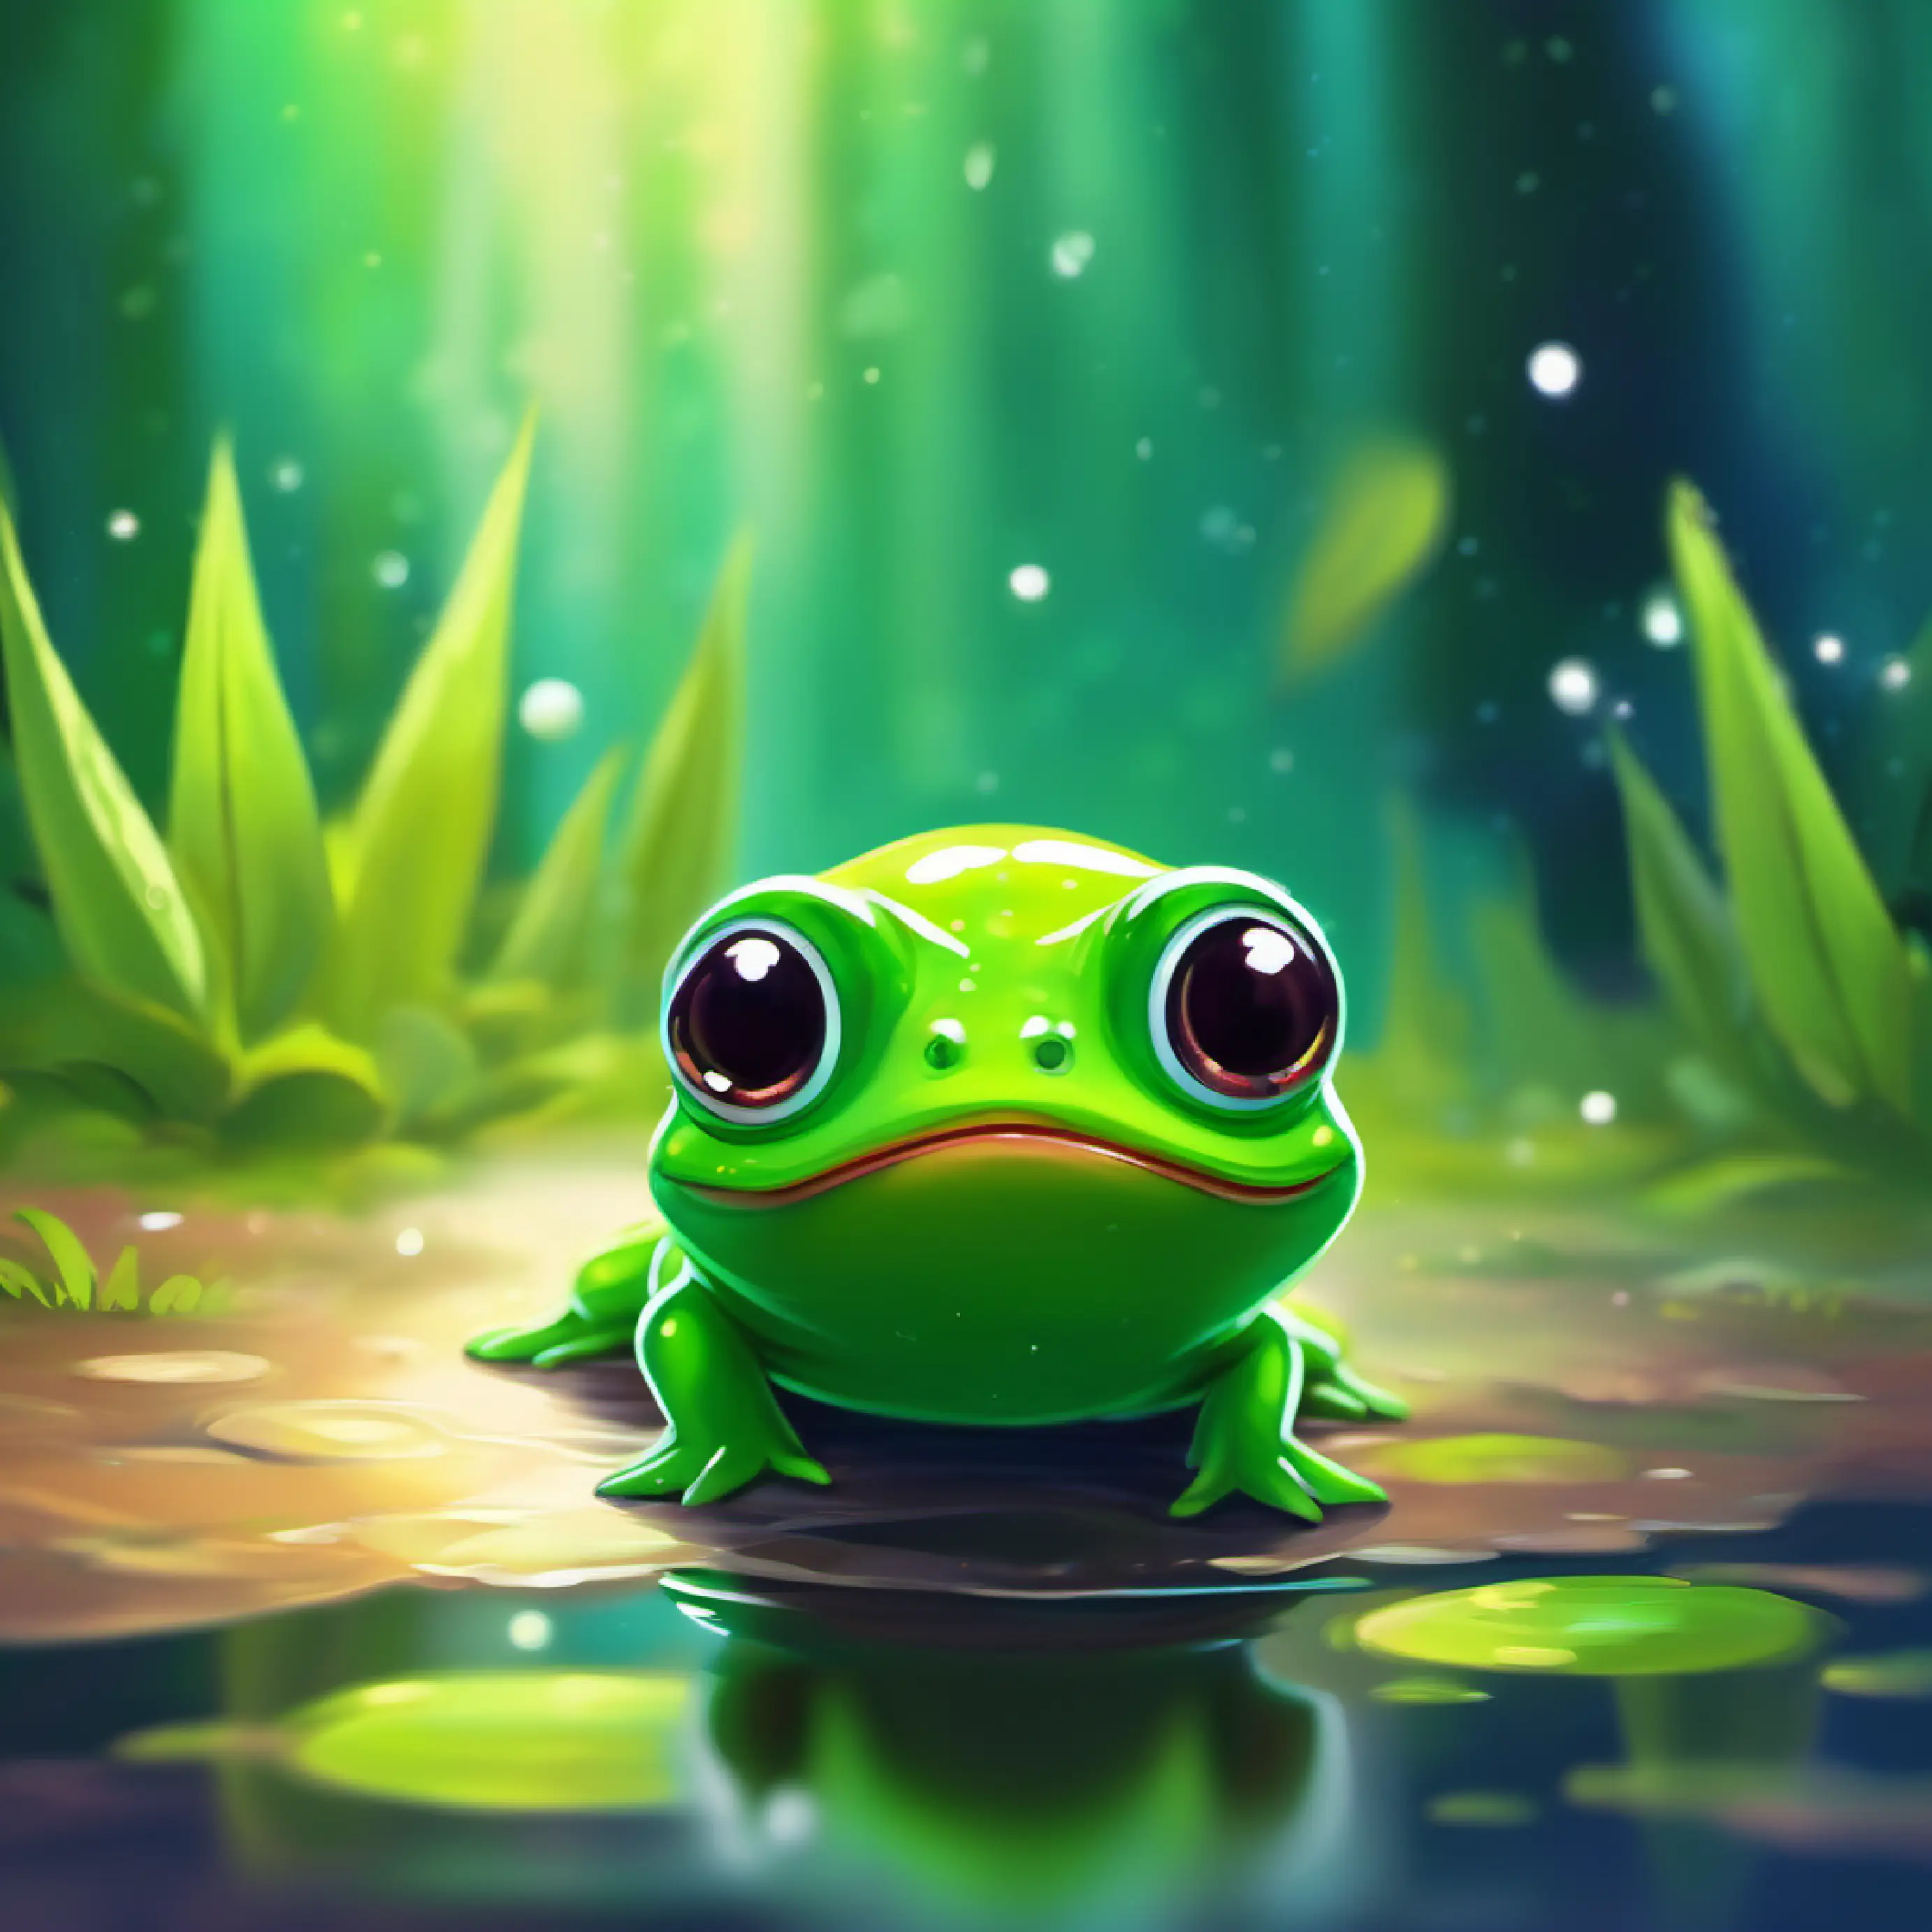 Tiny tadpole, vibrant green, curious eyes, eager to explore encounters a dangerous situation, shrinking puddle.